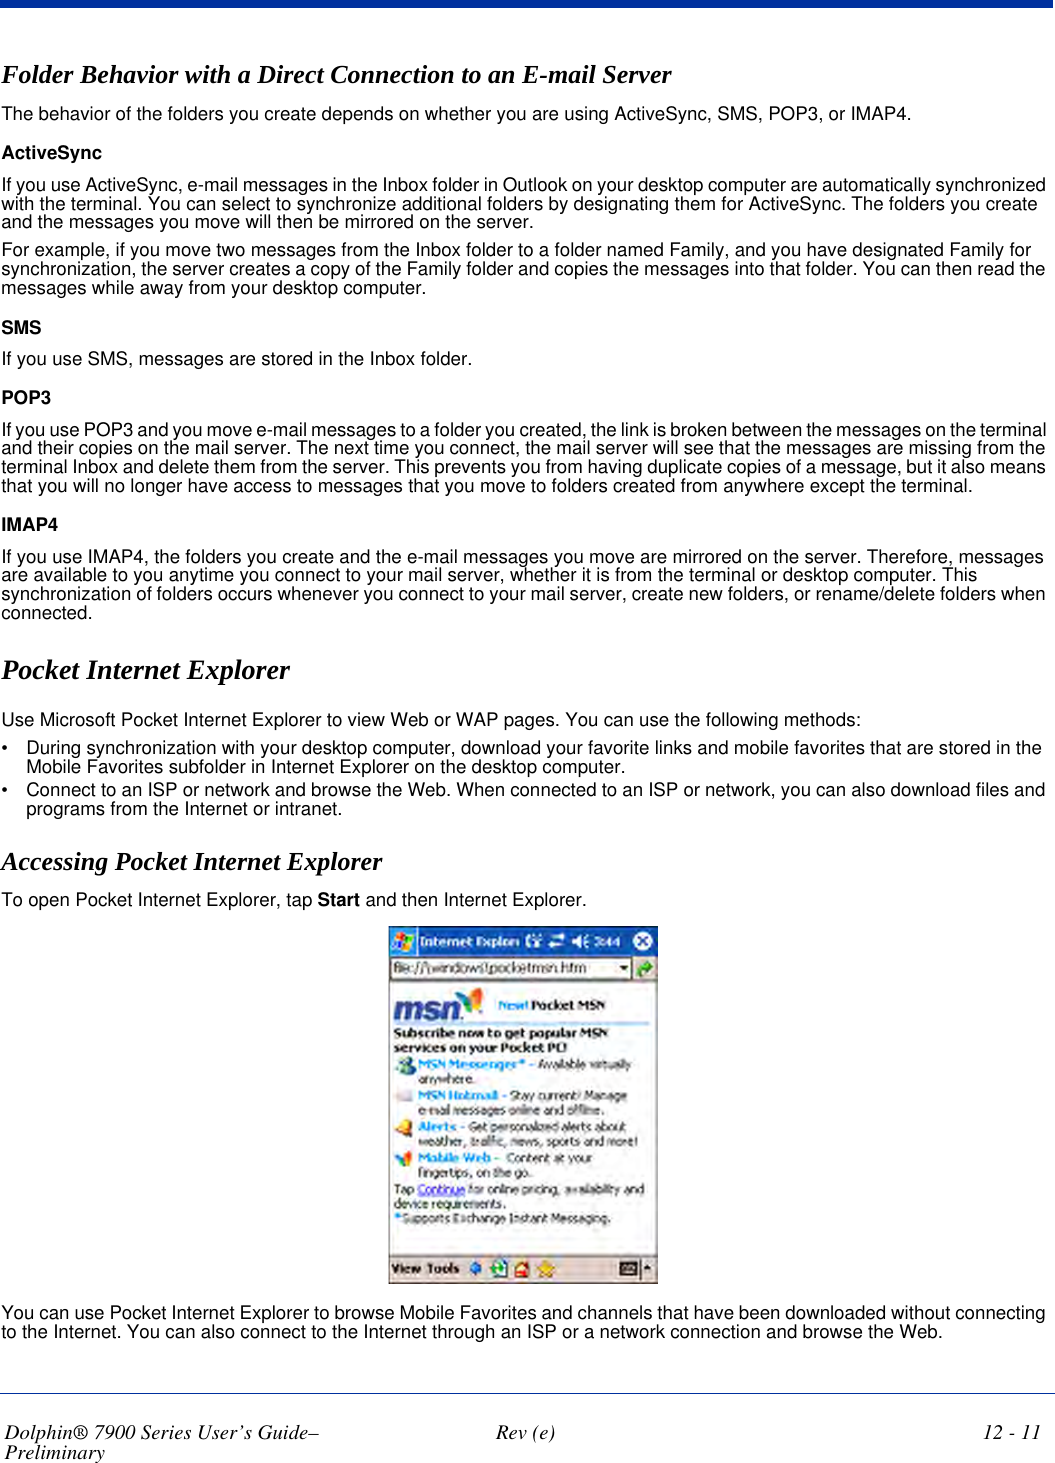 Dolphin® 7900 Series User’s Guide–Preliminary  Rev (e) 12 - 11Folder Behavior with a Direct Connection to an E-mail ServerThe behavior of the folders you create depends on whether you are using ActiveSync, SMS, POP3, or IMAP4. ActiveSyncIf you use ActiveSync, e-mail messages in the Inbox folder in Outlook on your desktop computer are automatically synchronized with the terminal. You can select to synchronize additional folders by designating them for ActiveSync. The folders you create and the messages you move will then be mirrored on the server. For example, if you move two messages from the Inbox folder to a folder named Family, and you have designated Family for synchronization, the server creates a copy of the Family folder and copies the messages into that folder. You can then read the messages while away from your desktop computer.SMSIf you use SMS, messages are stored in the Inbox folder. POP3If you use POP3 and you move e-mail messages to a folder you created, the link is broken between the messages on the terminal and their copies on the mail server. The next time you connect, the mail server will see that the messages are missing from the terminal Inbox and delete them from the server. This prevents you from having duplicate copies of a message, but it also means that you will no longer have access to messages that you move to folders created from anywhere except the terminal. IMAP4If you use IMAP4, the folders you create and the e-mail messages you move are mirrored on the server. Therefore, messages are available to you anytime you connect to your mail server, whether it is from the terminal or desktop computer. This synchronization of folders occurs whenever you connect to your mail server, create new folders, or rename/delete folders when connected. Pocket Internet Explorer Use Microsoft Pocket Internet Explorer to view Web or WAP pages. You can use the following methods:•           During synchronization with your desktop computer, download your favorite links and mobile favorites that are stored in the Mobile Favorites subfolder in Internet Explorer on the desktop computer.•           Connect to an ISP or network and browse the Web. When connected to an ISP or network, you can also download files and programs from the Internet or intranet.Accessing Pocket Internet ExplorerTo open Pocket Internet Explorer, tap Start and then Internet Explorer.You can use Pocket Internet Explorer to browse Mobile Favorites and channels that have been downloaded without connecting to the Internet. You can also connect to the Internet through an ISP or a network connection and browse the Web.